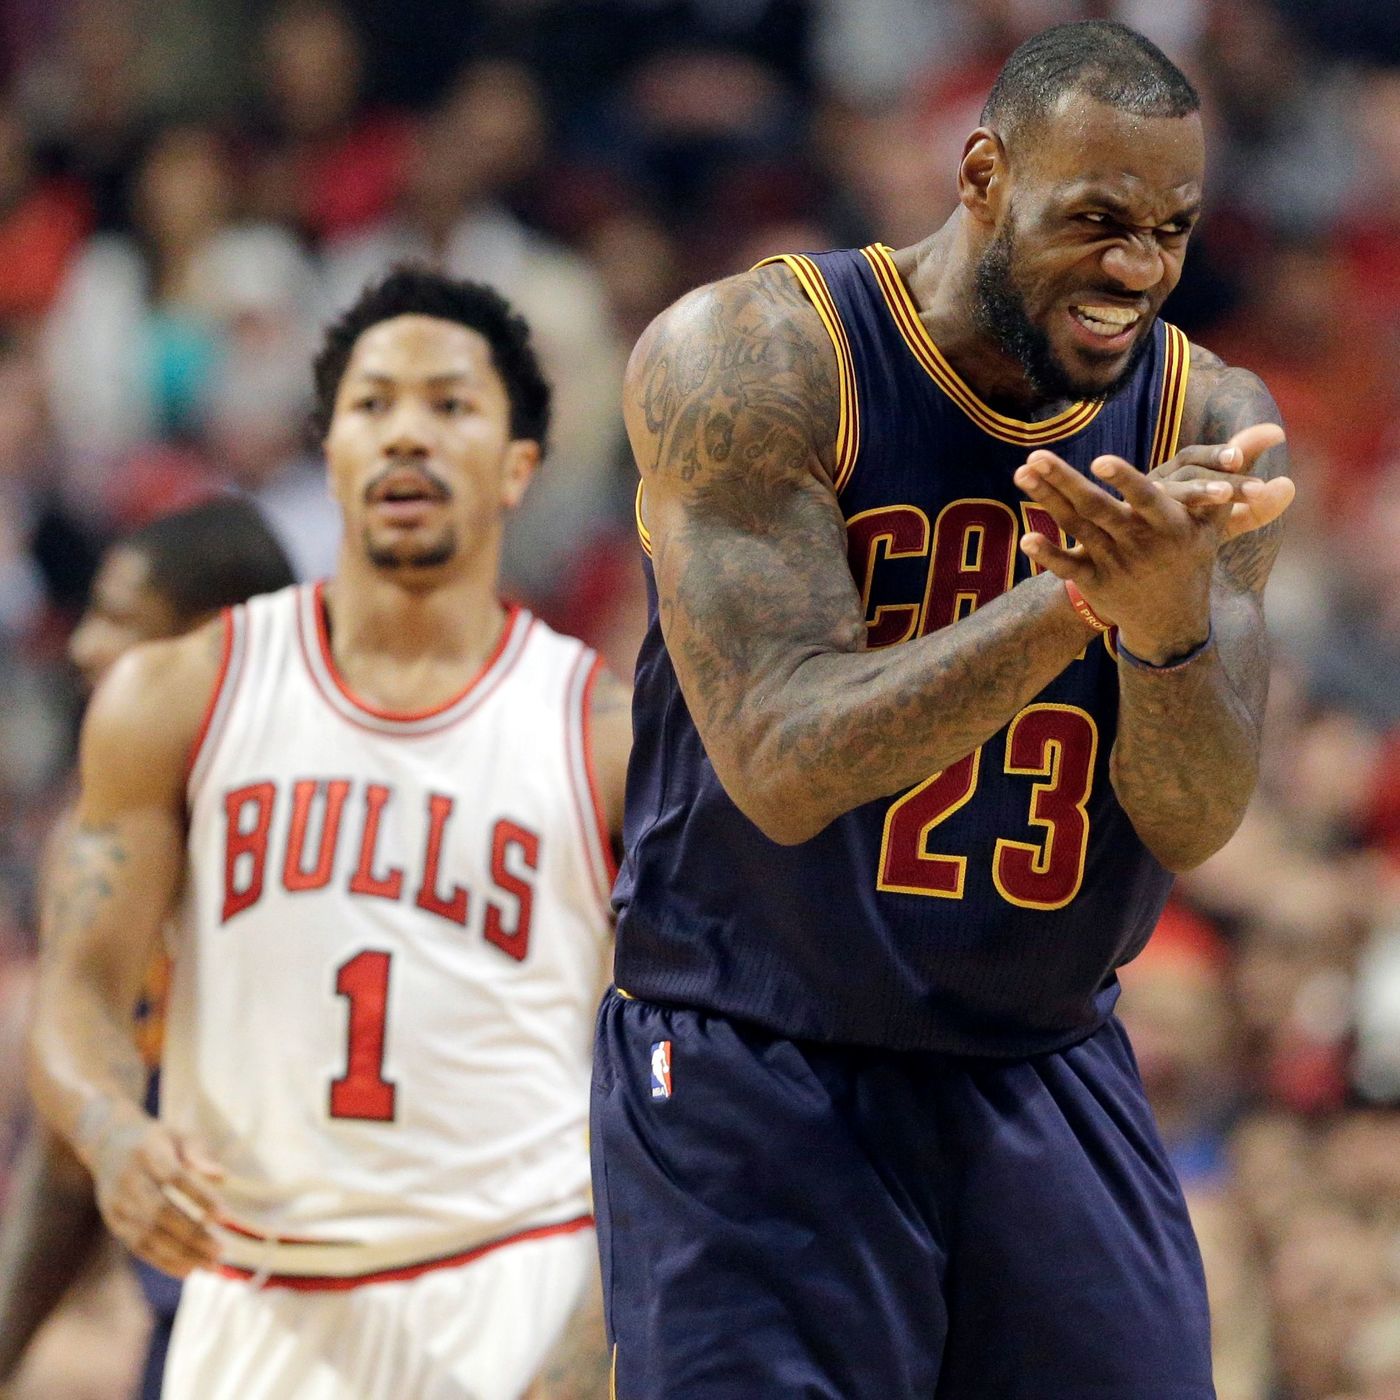 Eastern Conference preview: Cavaliers poised to dominate